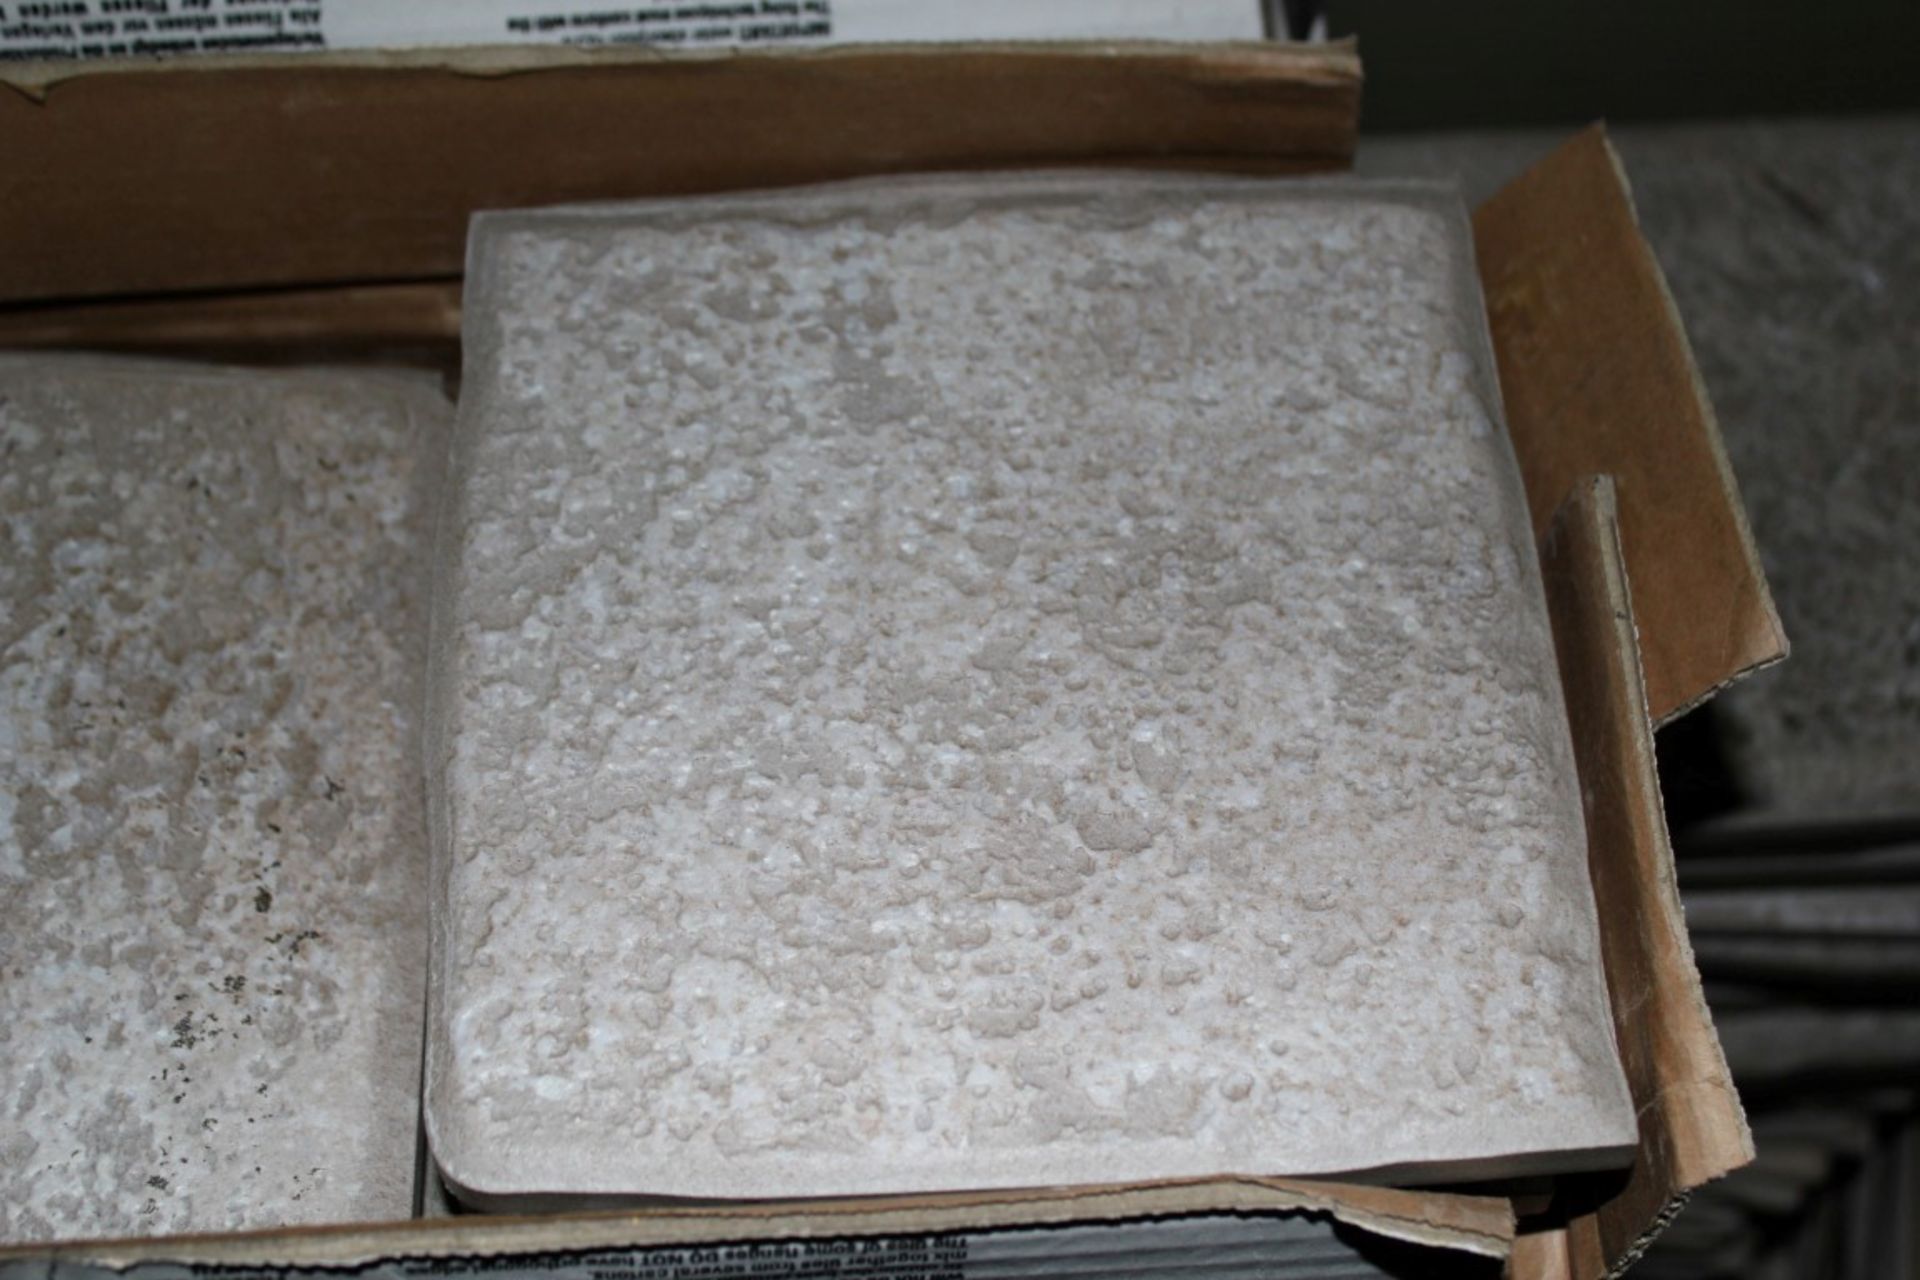 16 x Boxes of Rex Ceramiche Artistiche Wall Tiles - Lot Includes 16 Boxes of 40 Tiles - Tile Size 15 - Image 2 of 5